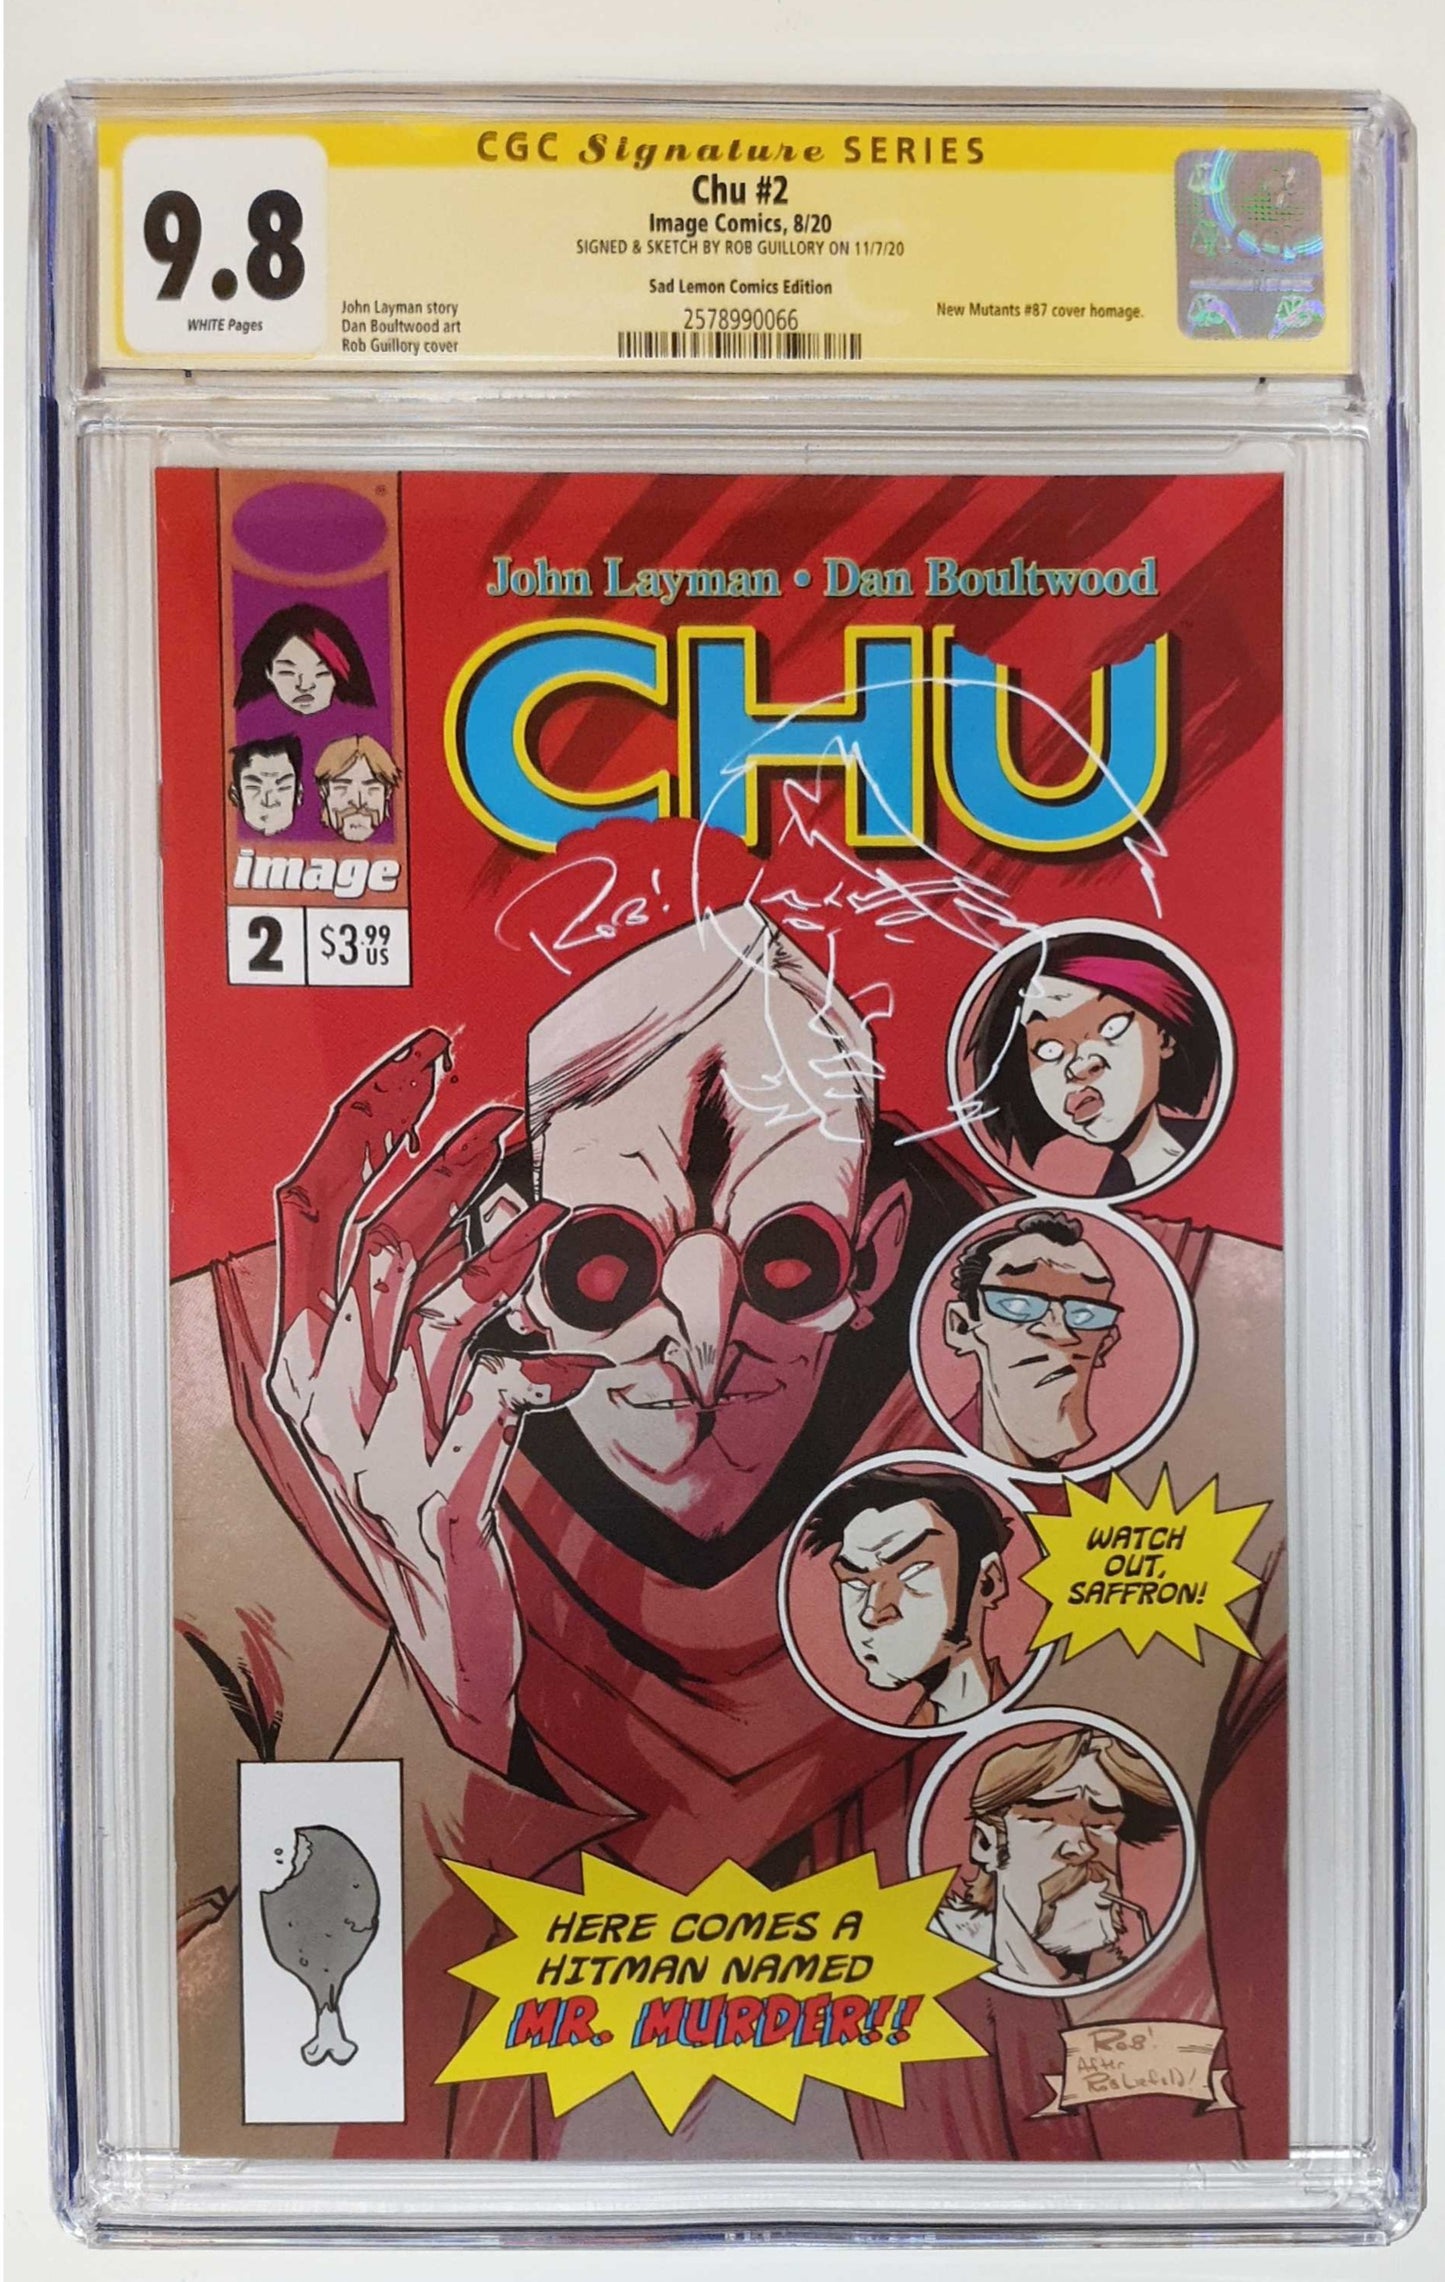 CHU #2 ROB GUILLORY NEW MUTANTS 87 HOMAGE VARIANT LIMITED TO 500 CGC 9.8 SAFFRON REMARK